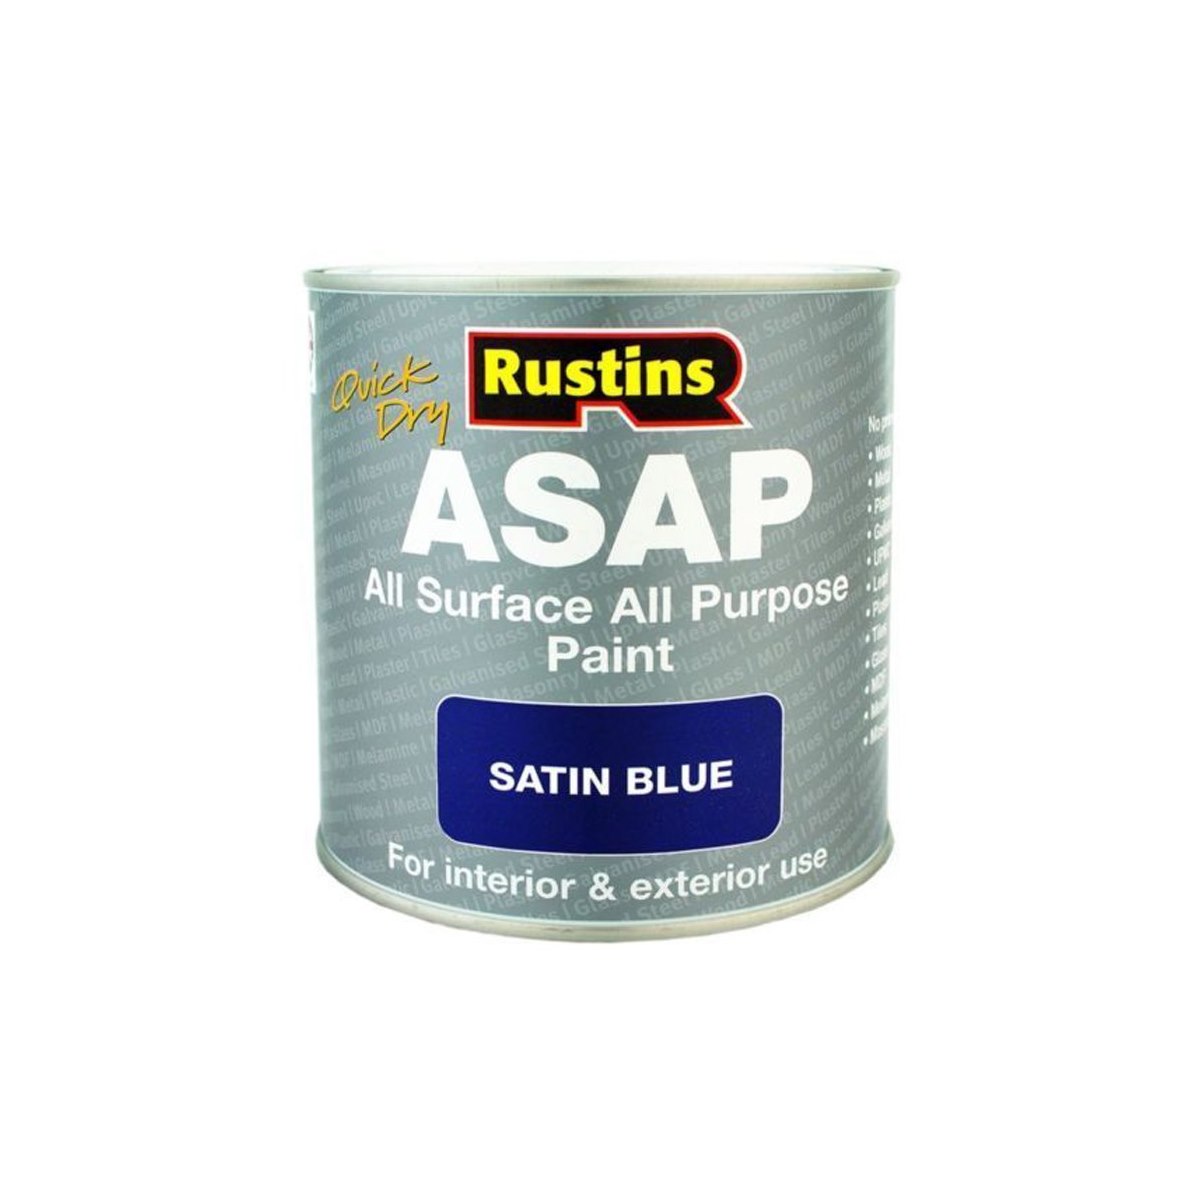 Rustins Quick Dry All Surface All Purpose Paint (ASAP) Blue 1 Litre